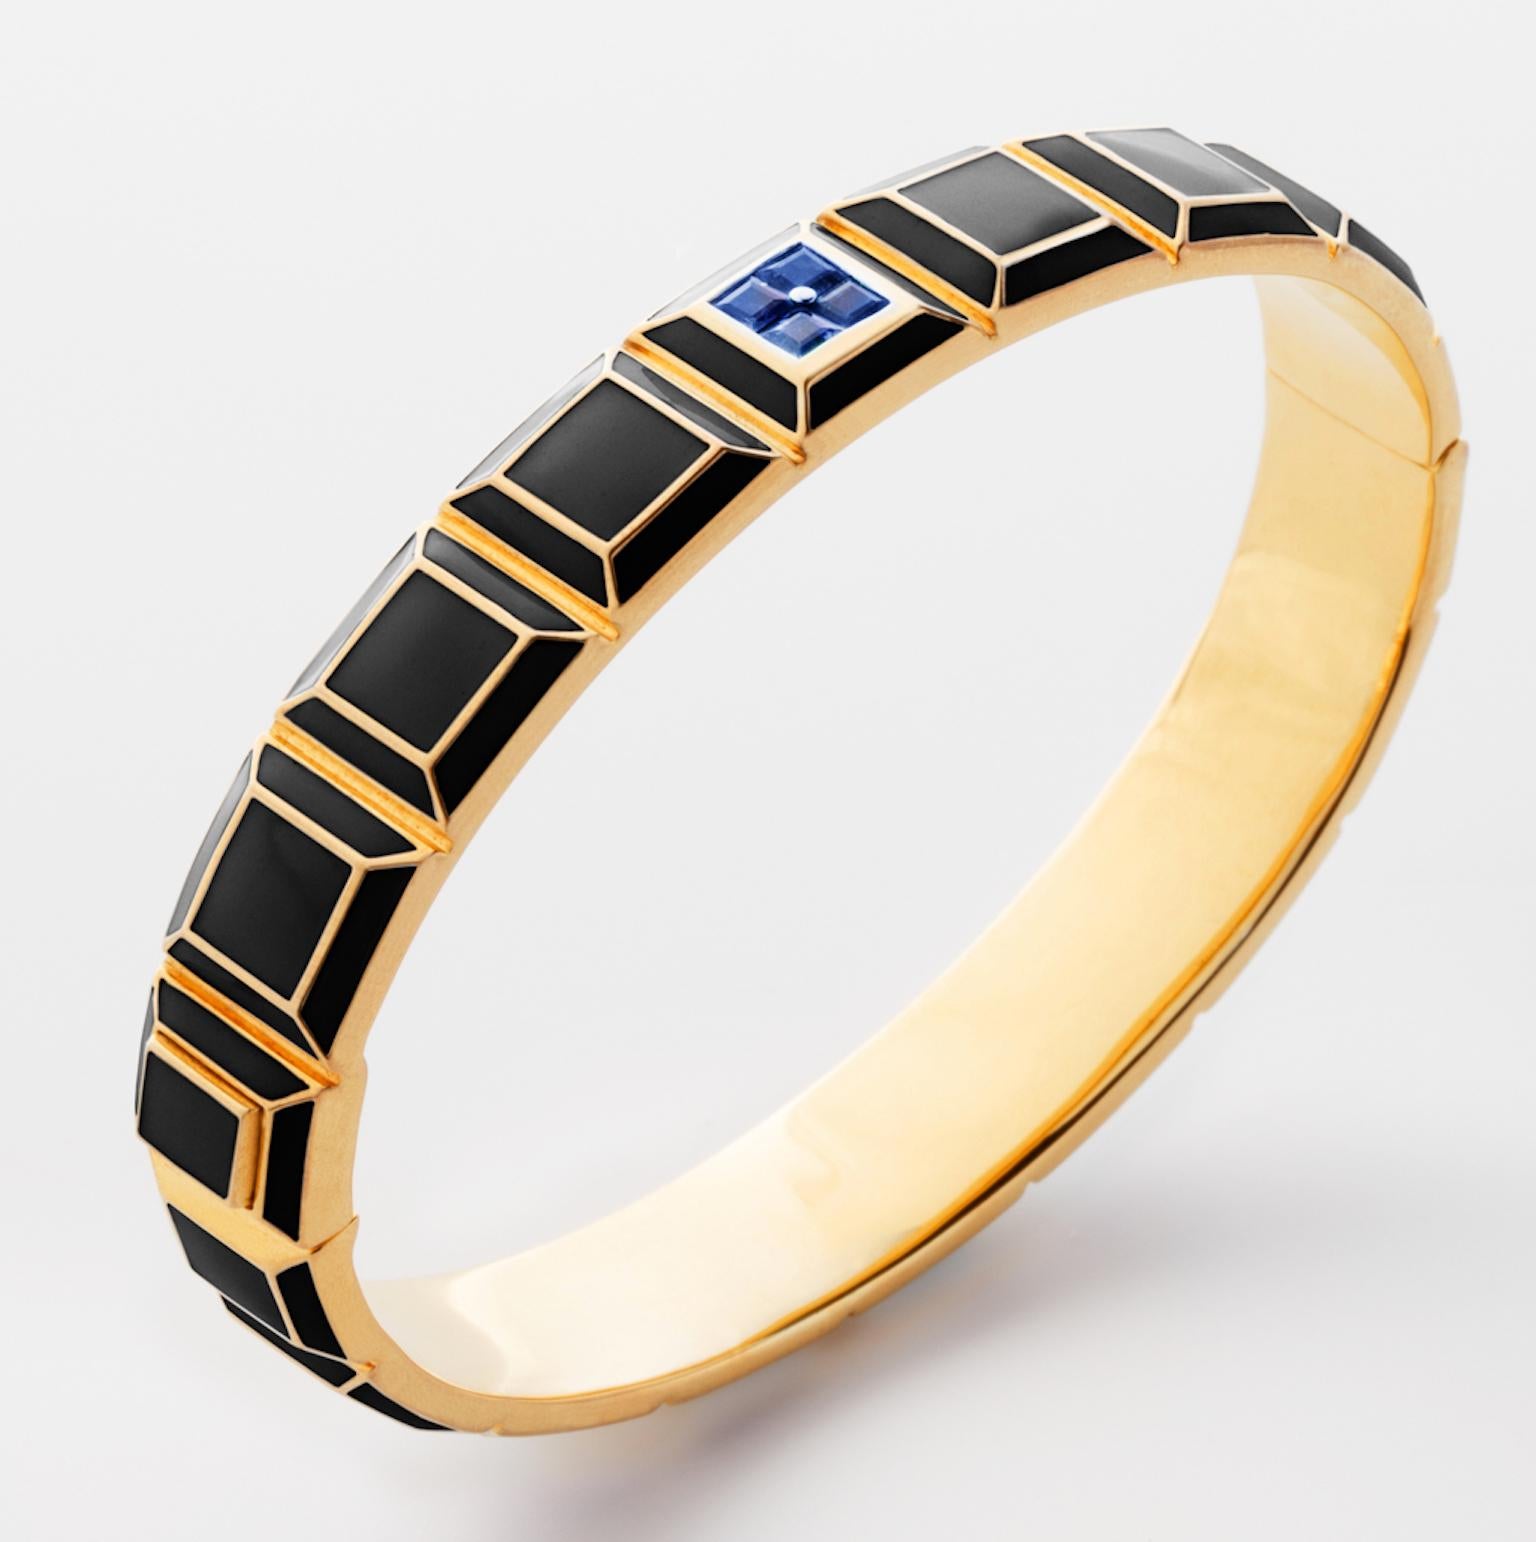 Gold-Plated Enamel Carousel Bracelet features a Yellow Gold Plated Silver bracelet with black enamel and blue sapphires, along with a clasp closure that secures the bracelet onto the wearer's wrist. 
Yellow Gold Plated Silver, Black Enamel, Blue